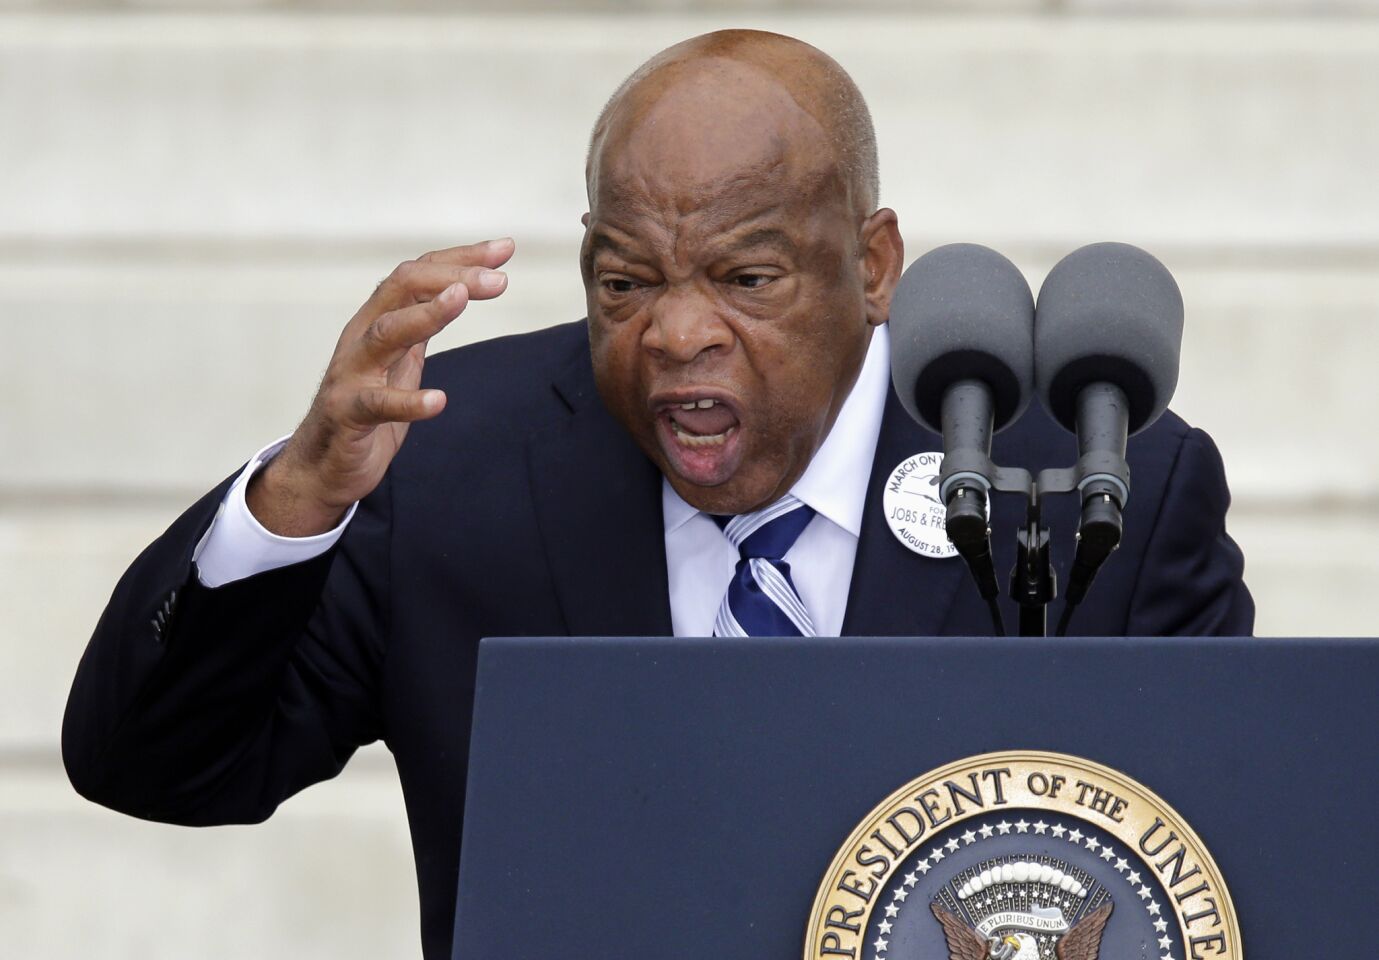 Rep. John Lewis gestures emphatically while speaking at a lectern during a commemoration of the March on Washington